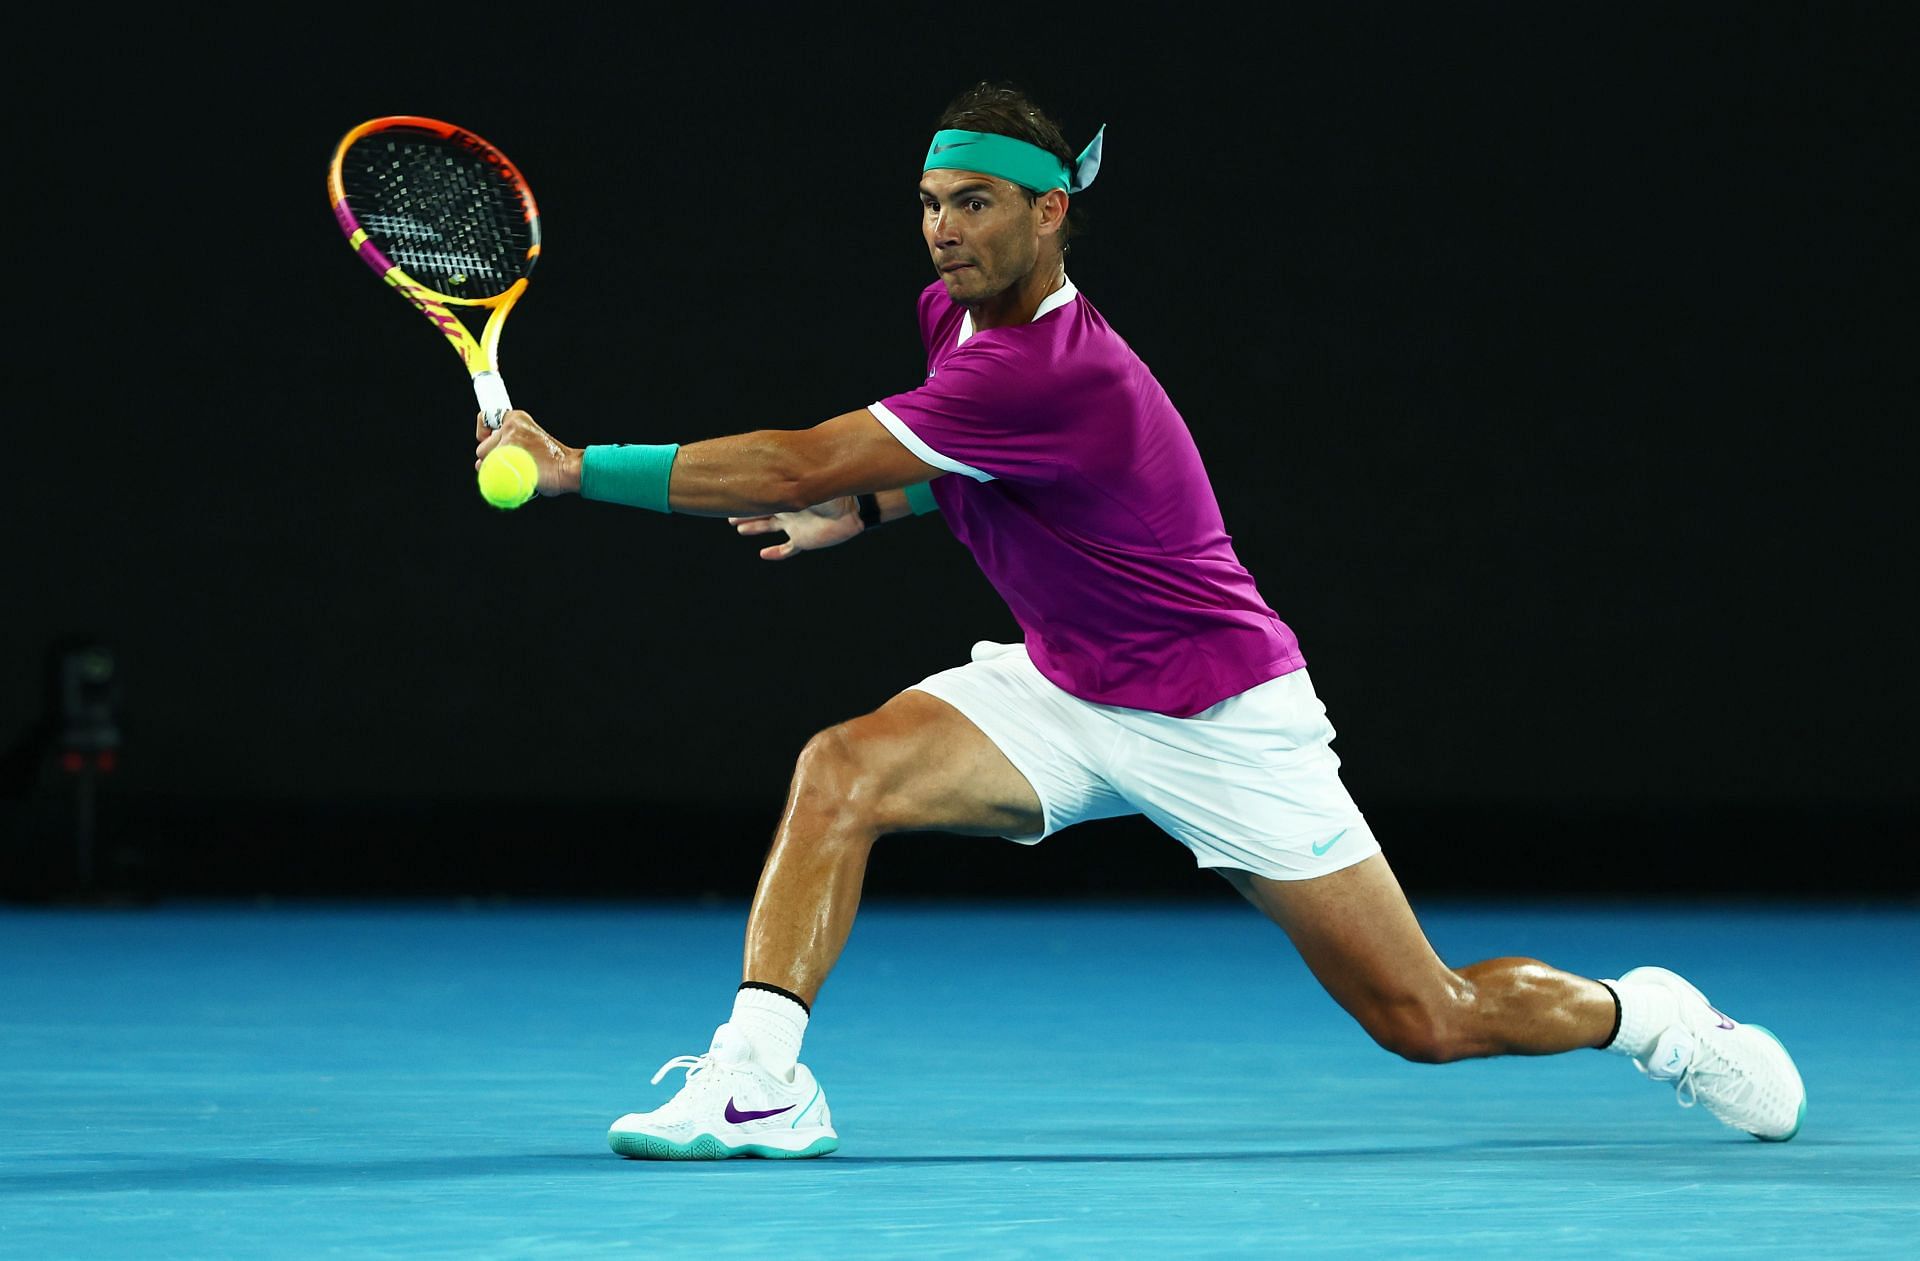 Rafael Nadal has been in good form lately